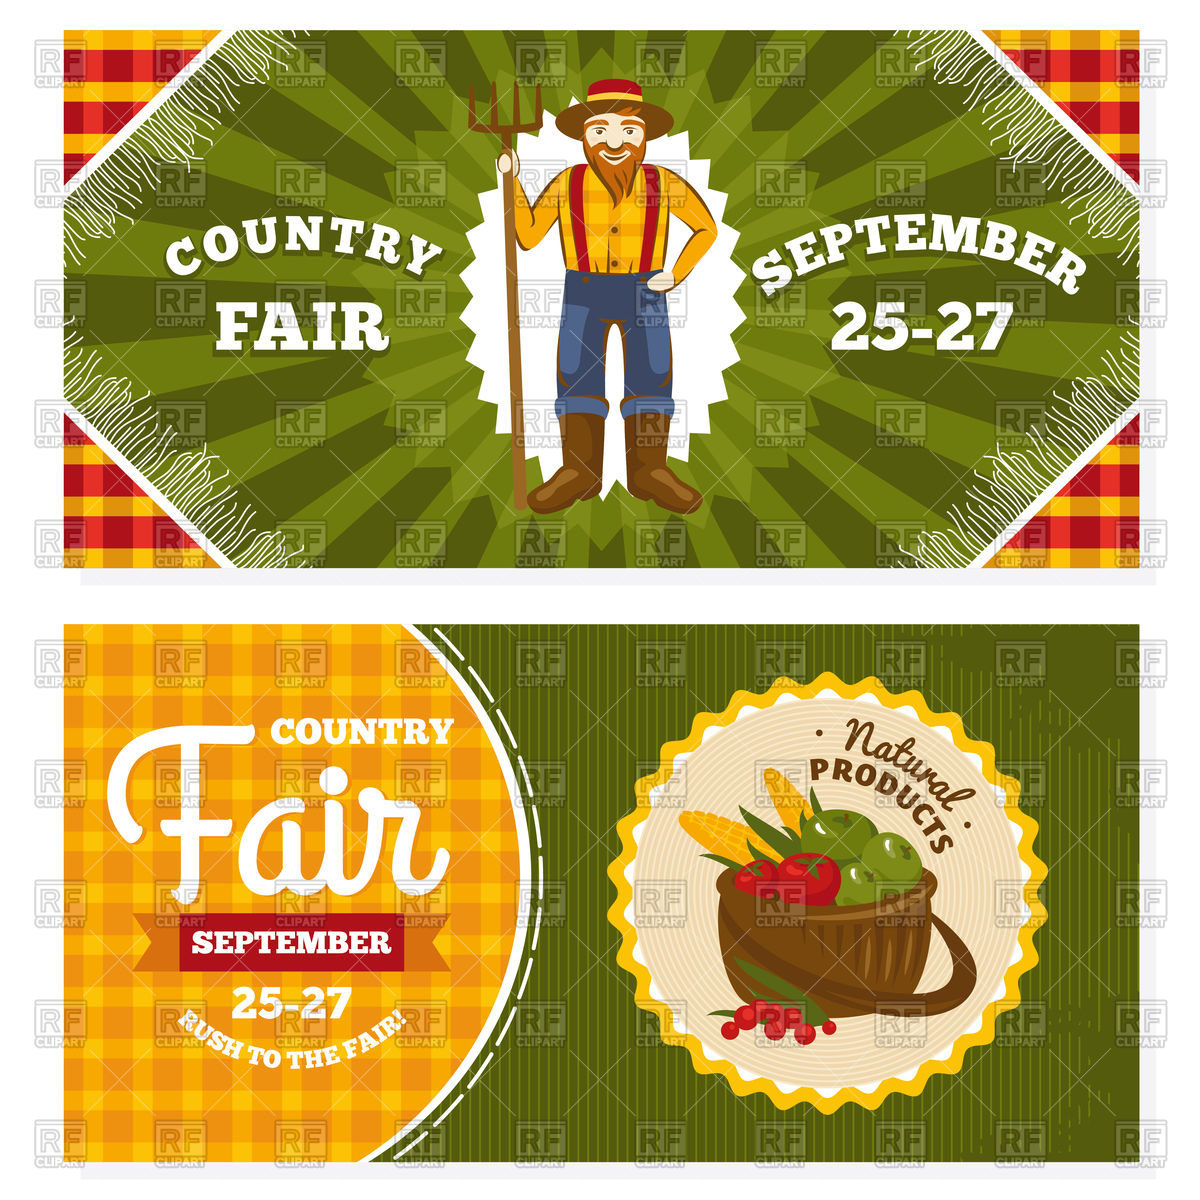 Country Fair   Vintage Invitation Cards 93709 Download Royalty Free